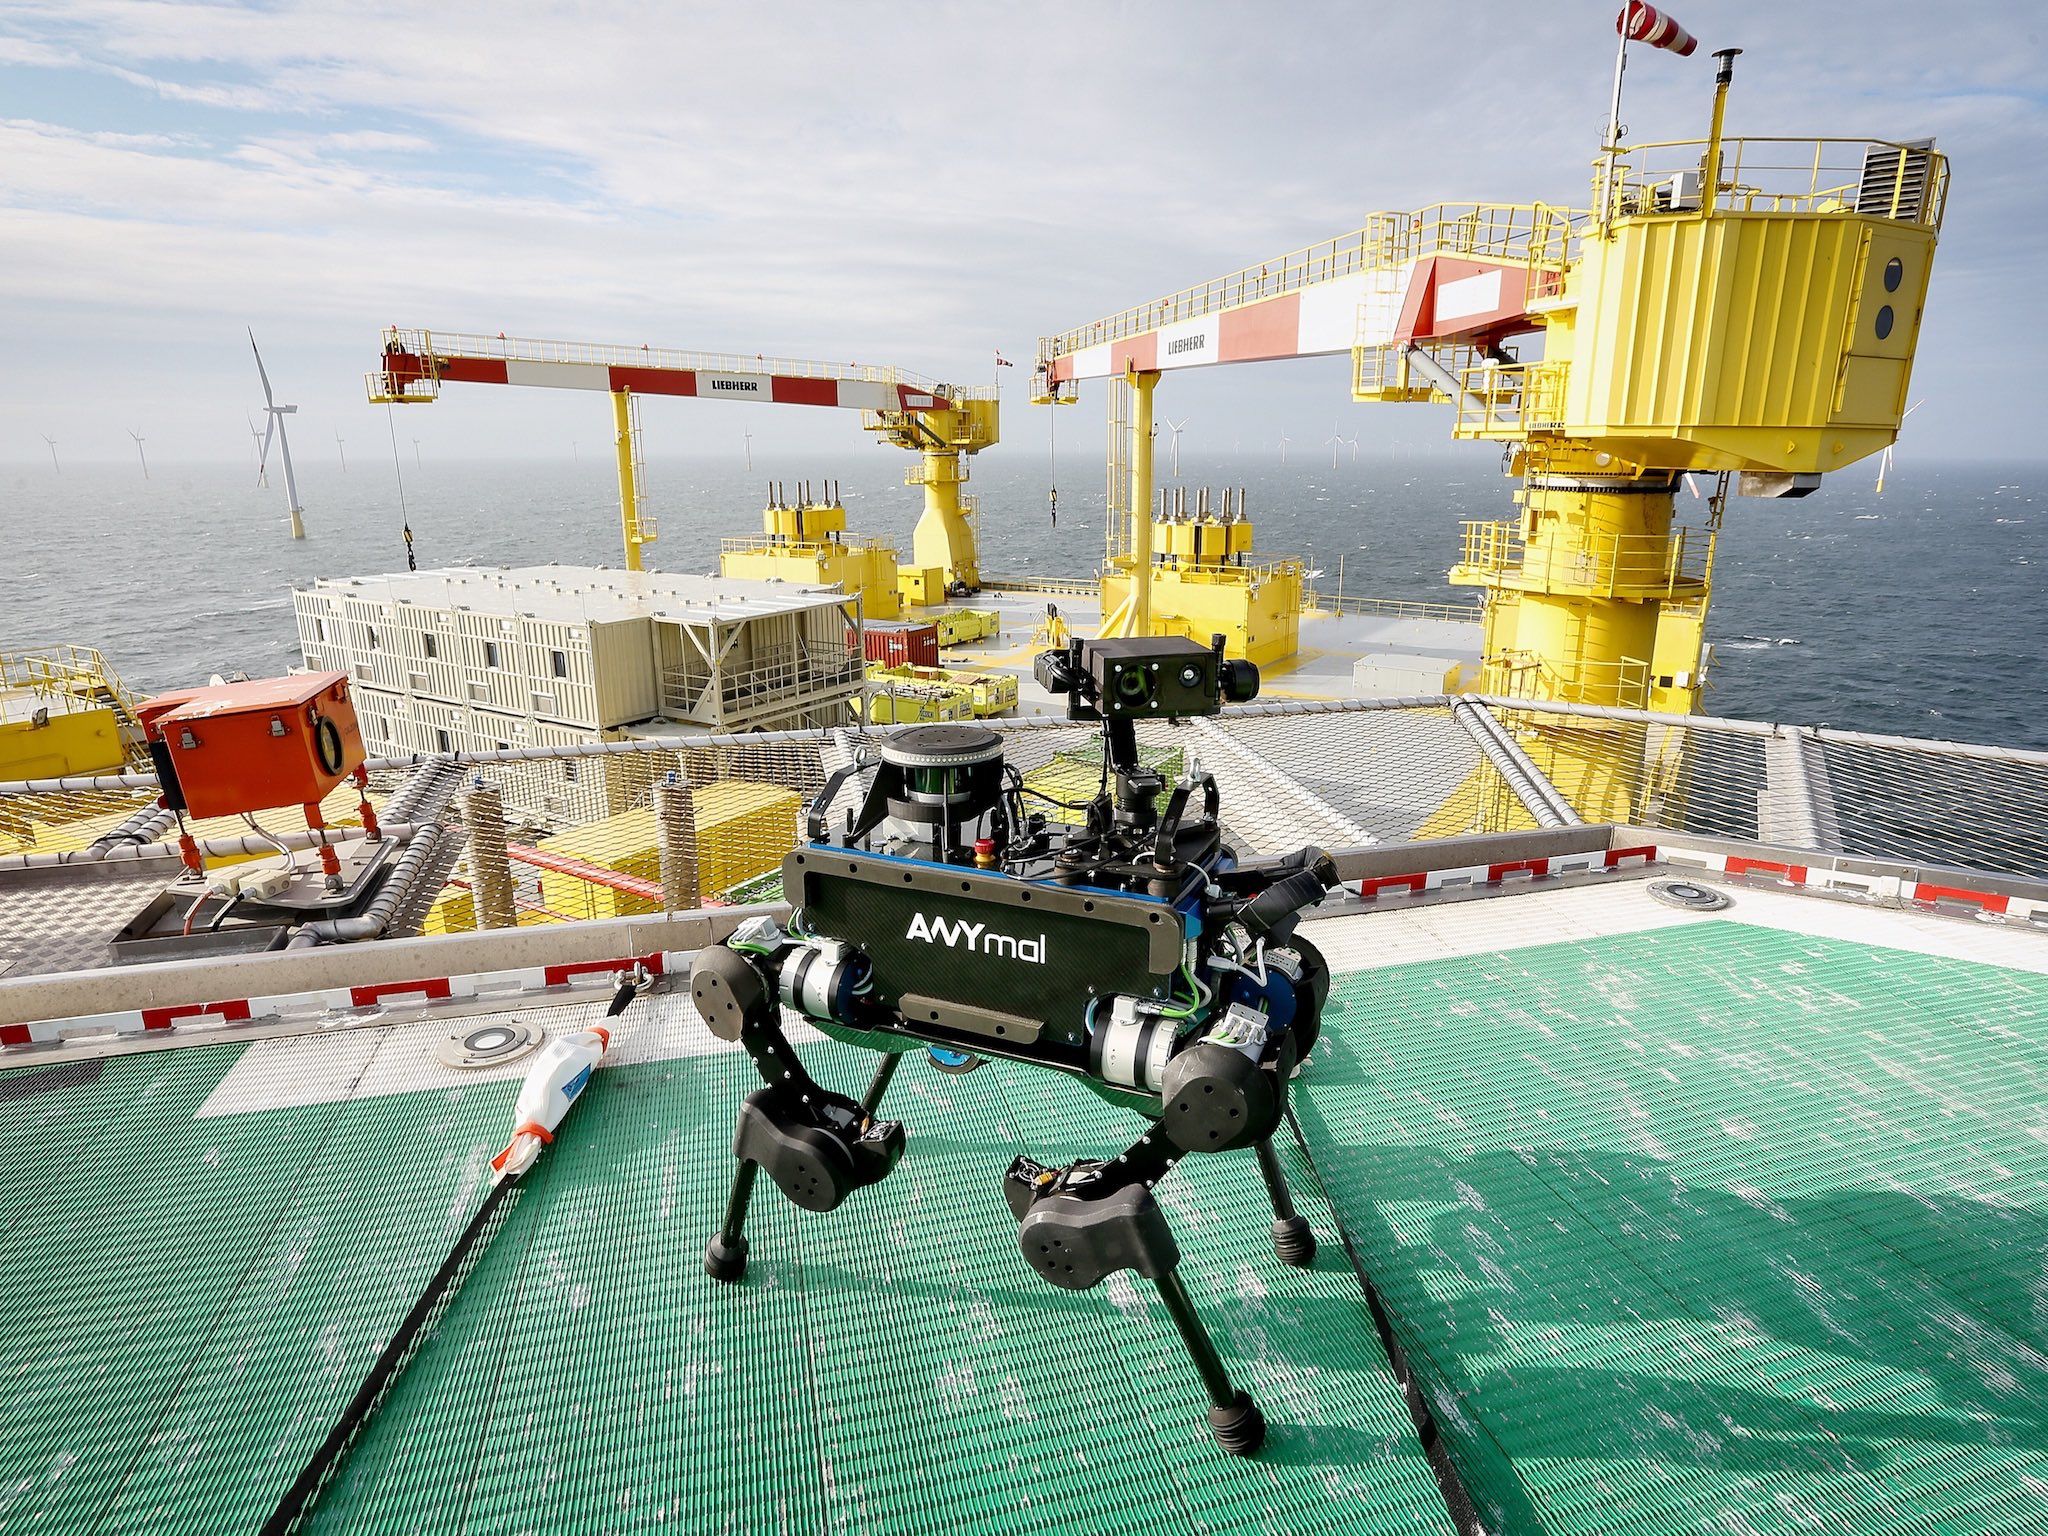 North Sea Deployment Shows How Quadruped Robots Can Be Commercially Useful